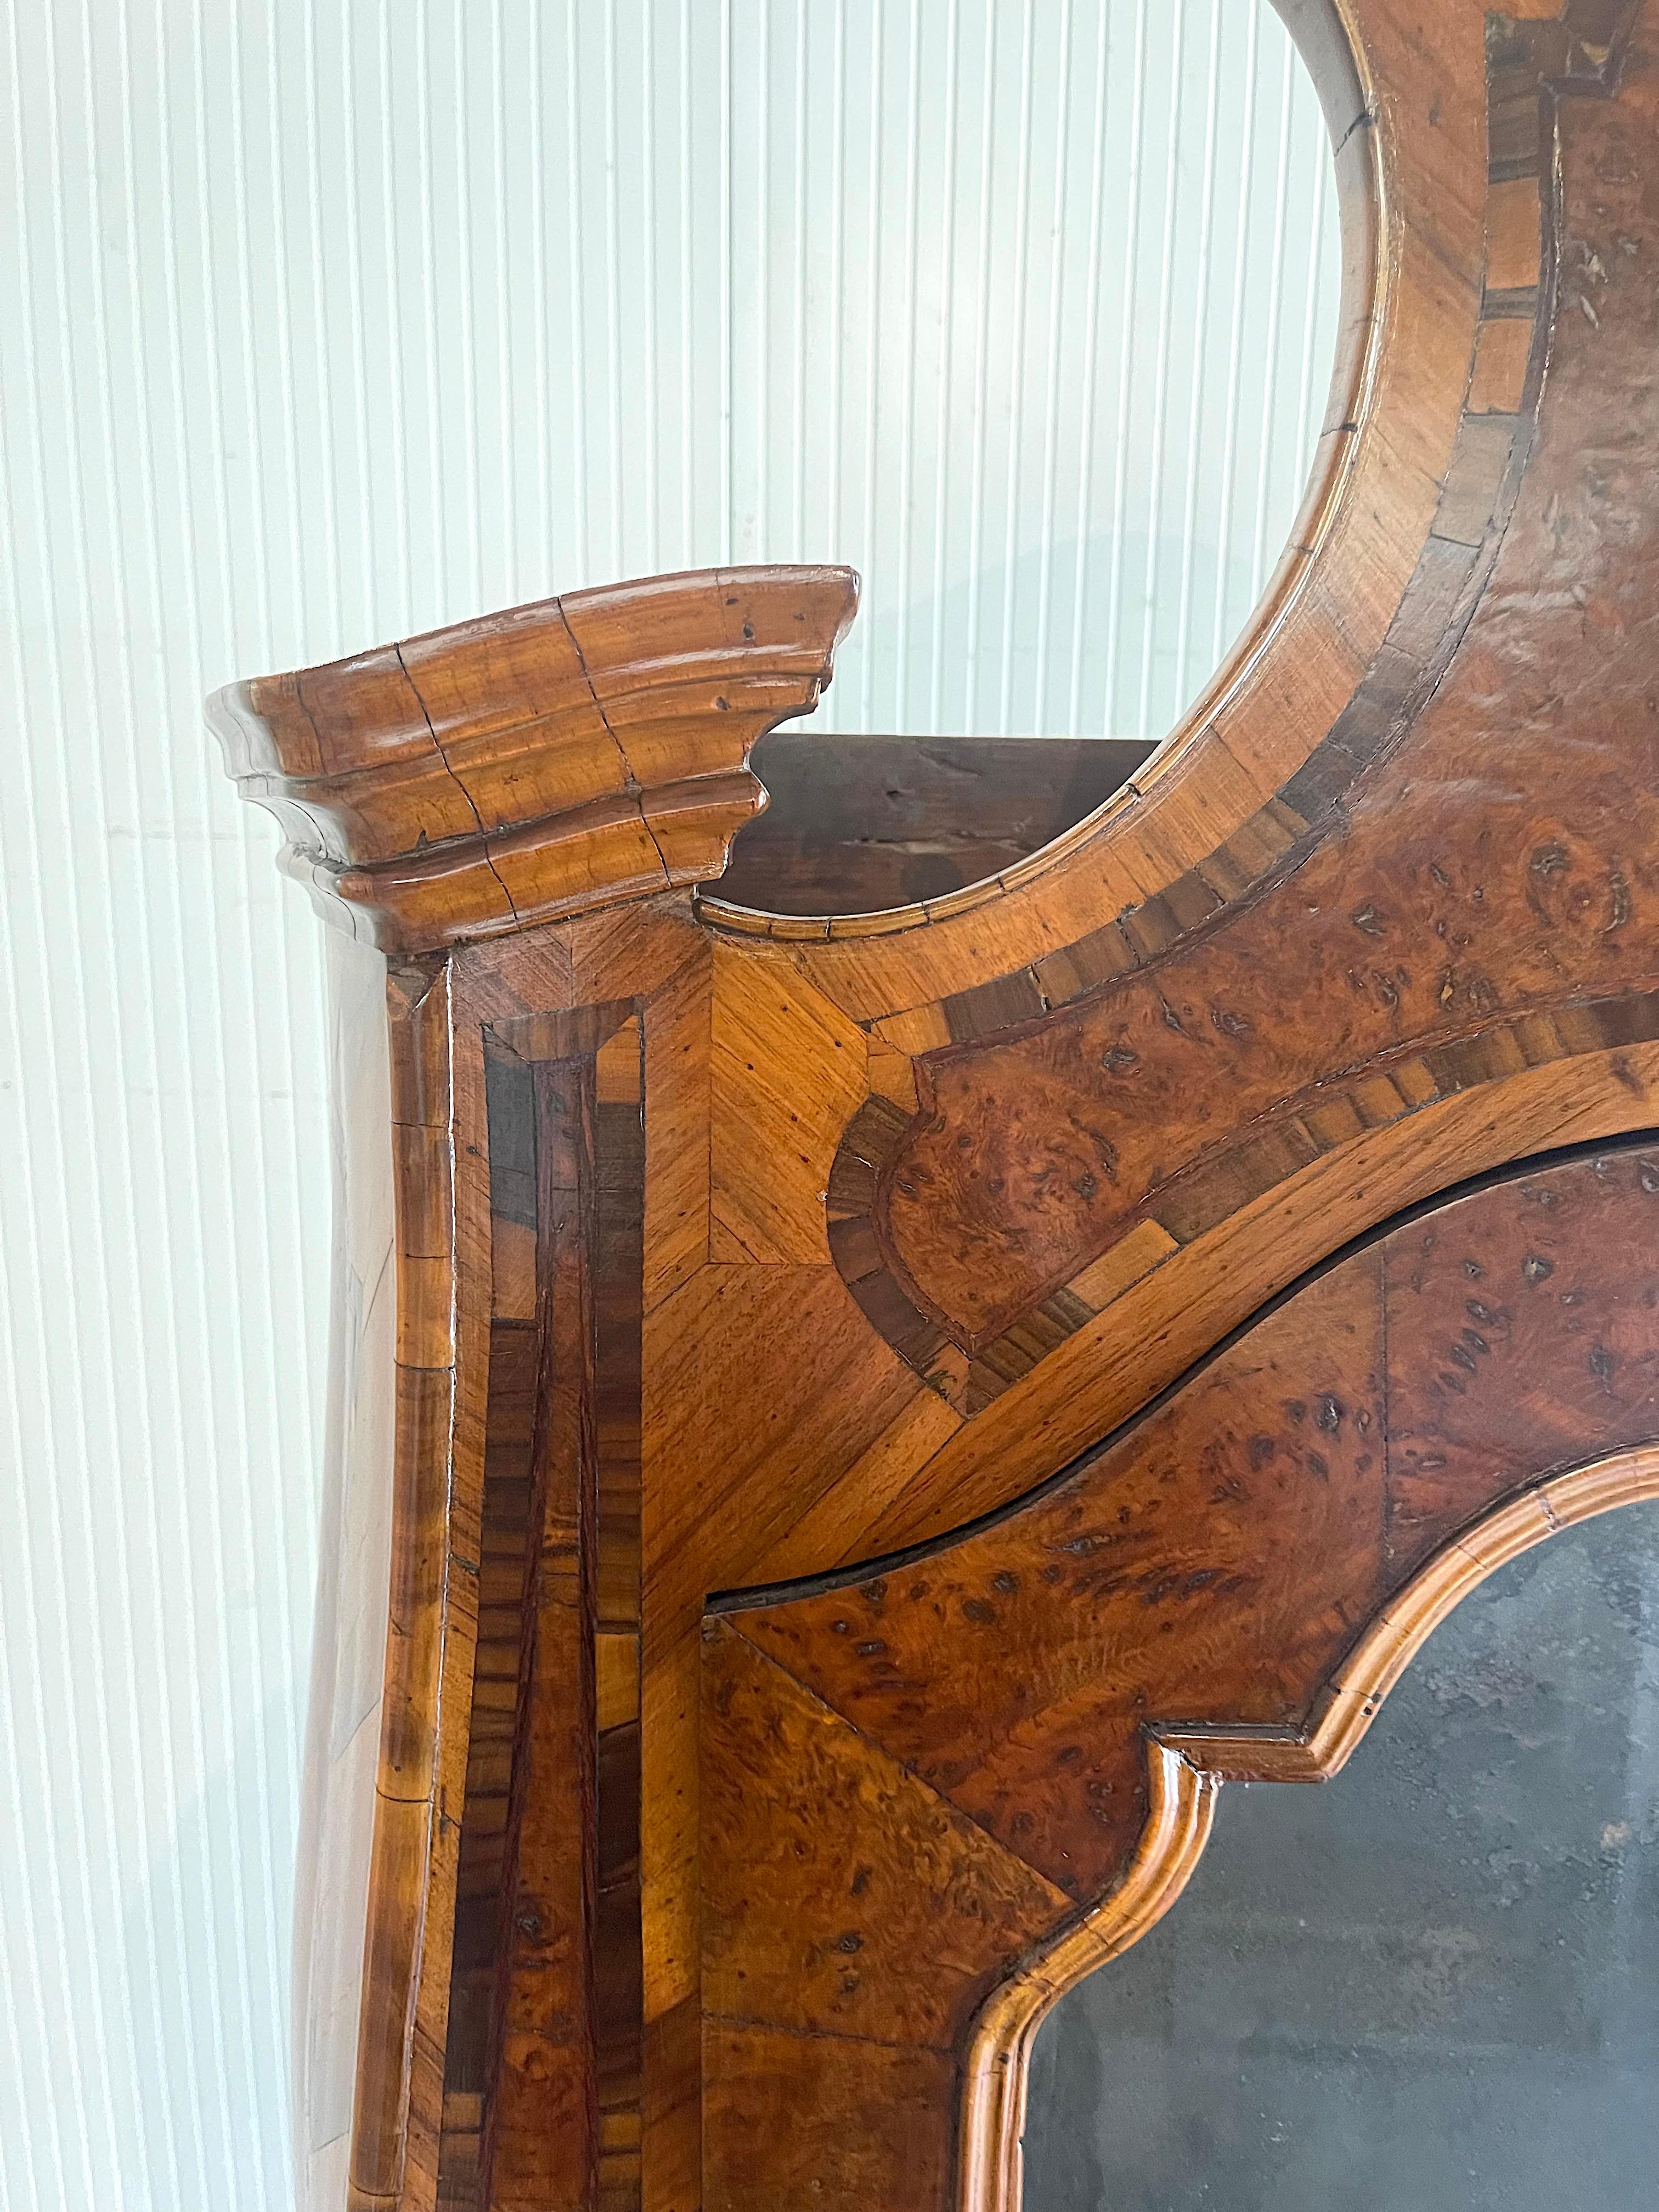 Wood Trumeau Mid-19th Century, Northern Italy For Sale